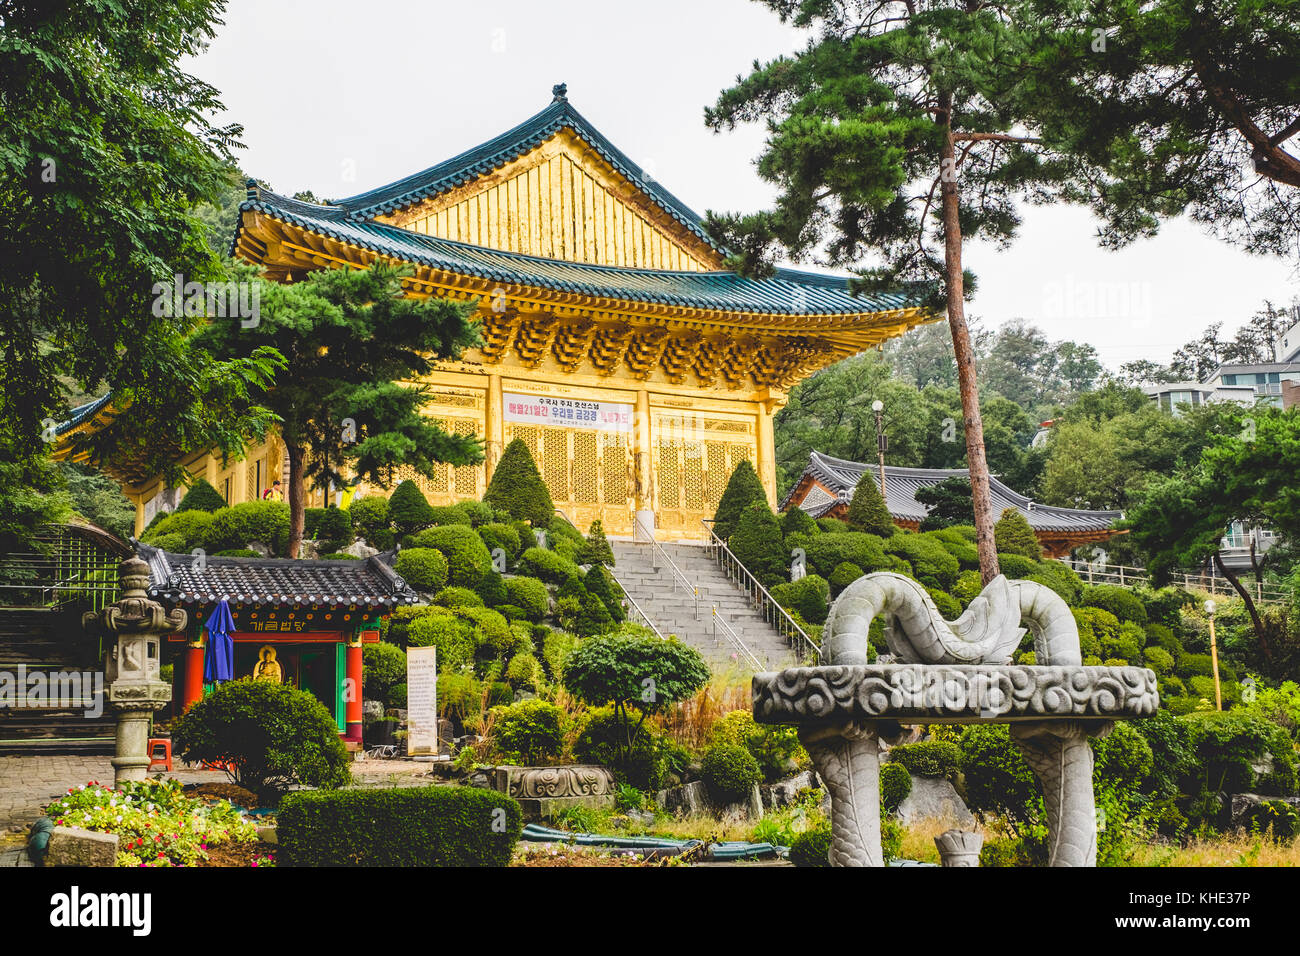 A Buddhist temple in korea painted in gold paint. Stock Photo